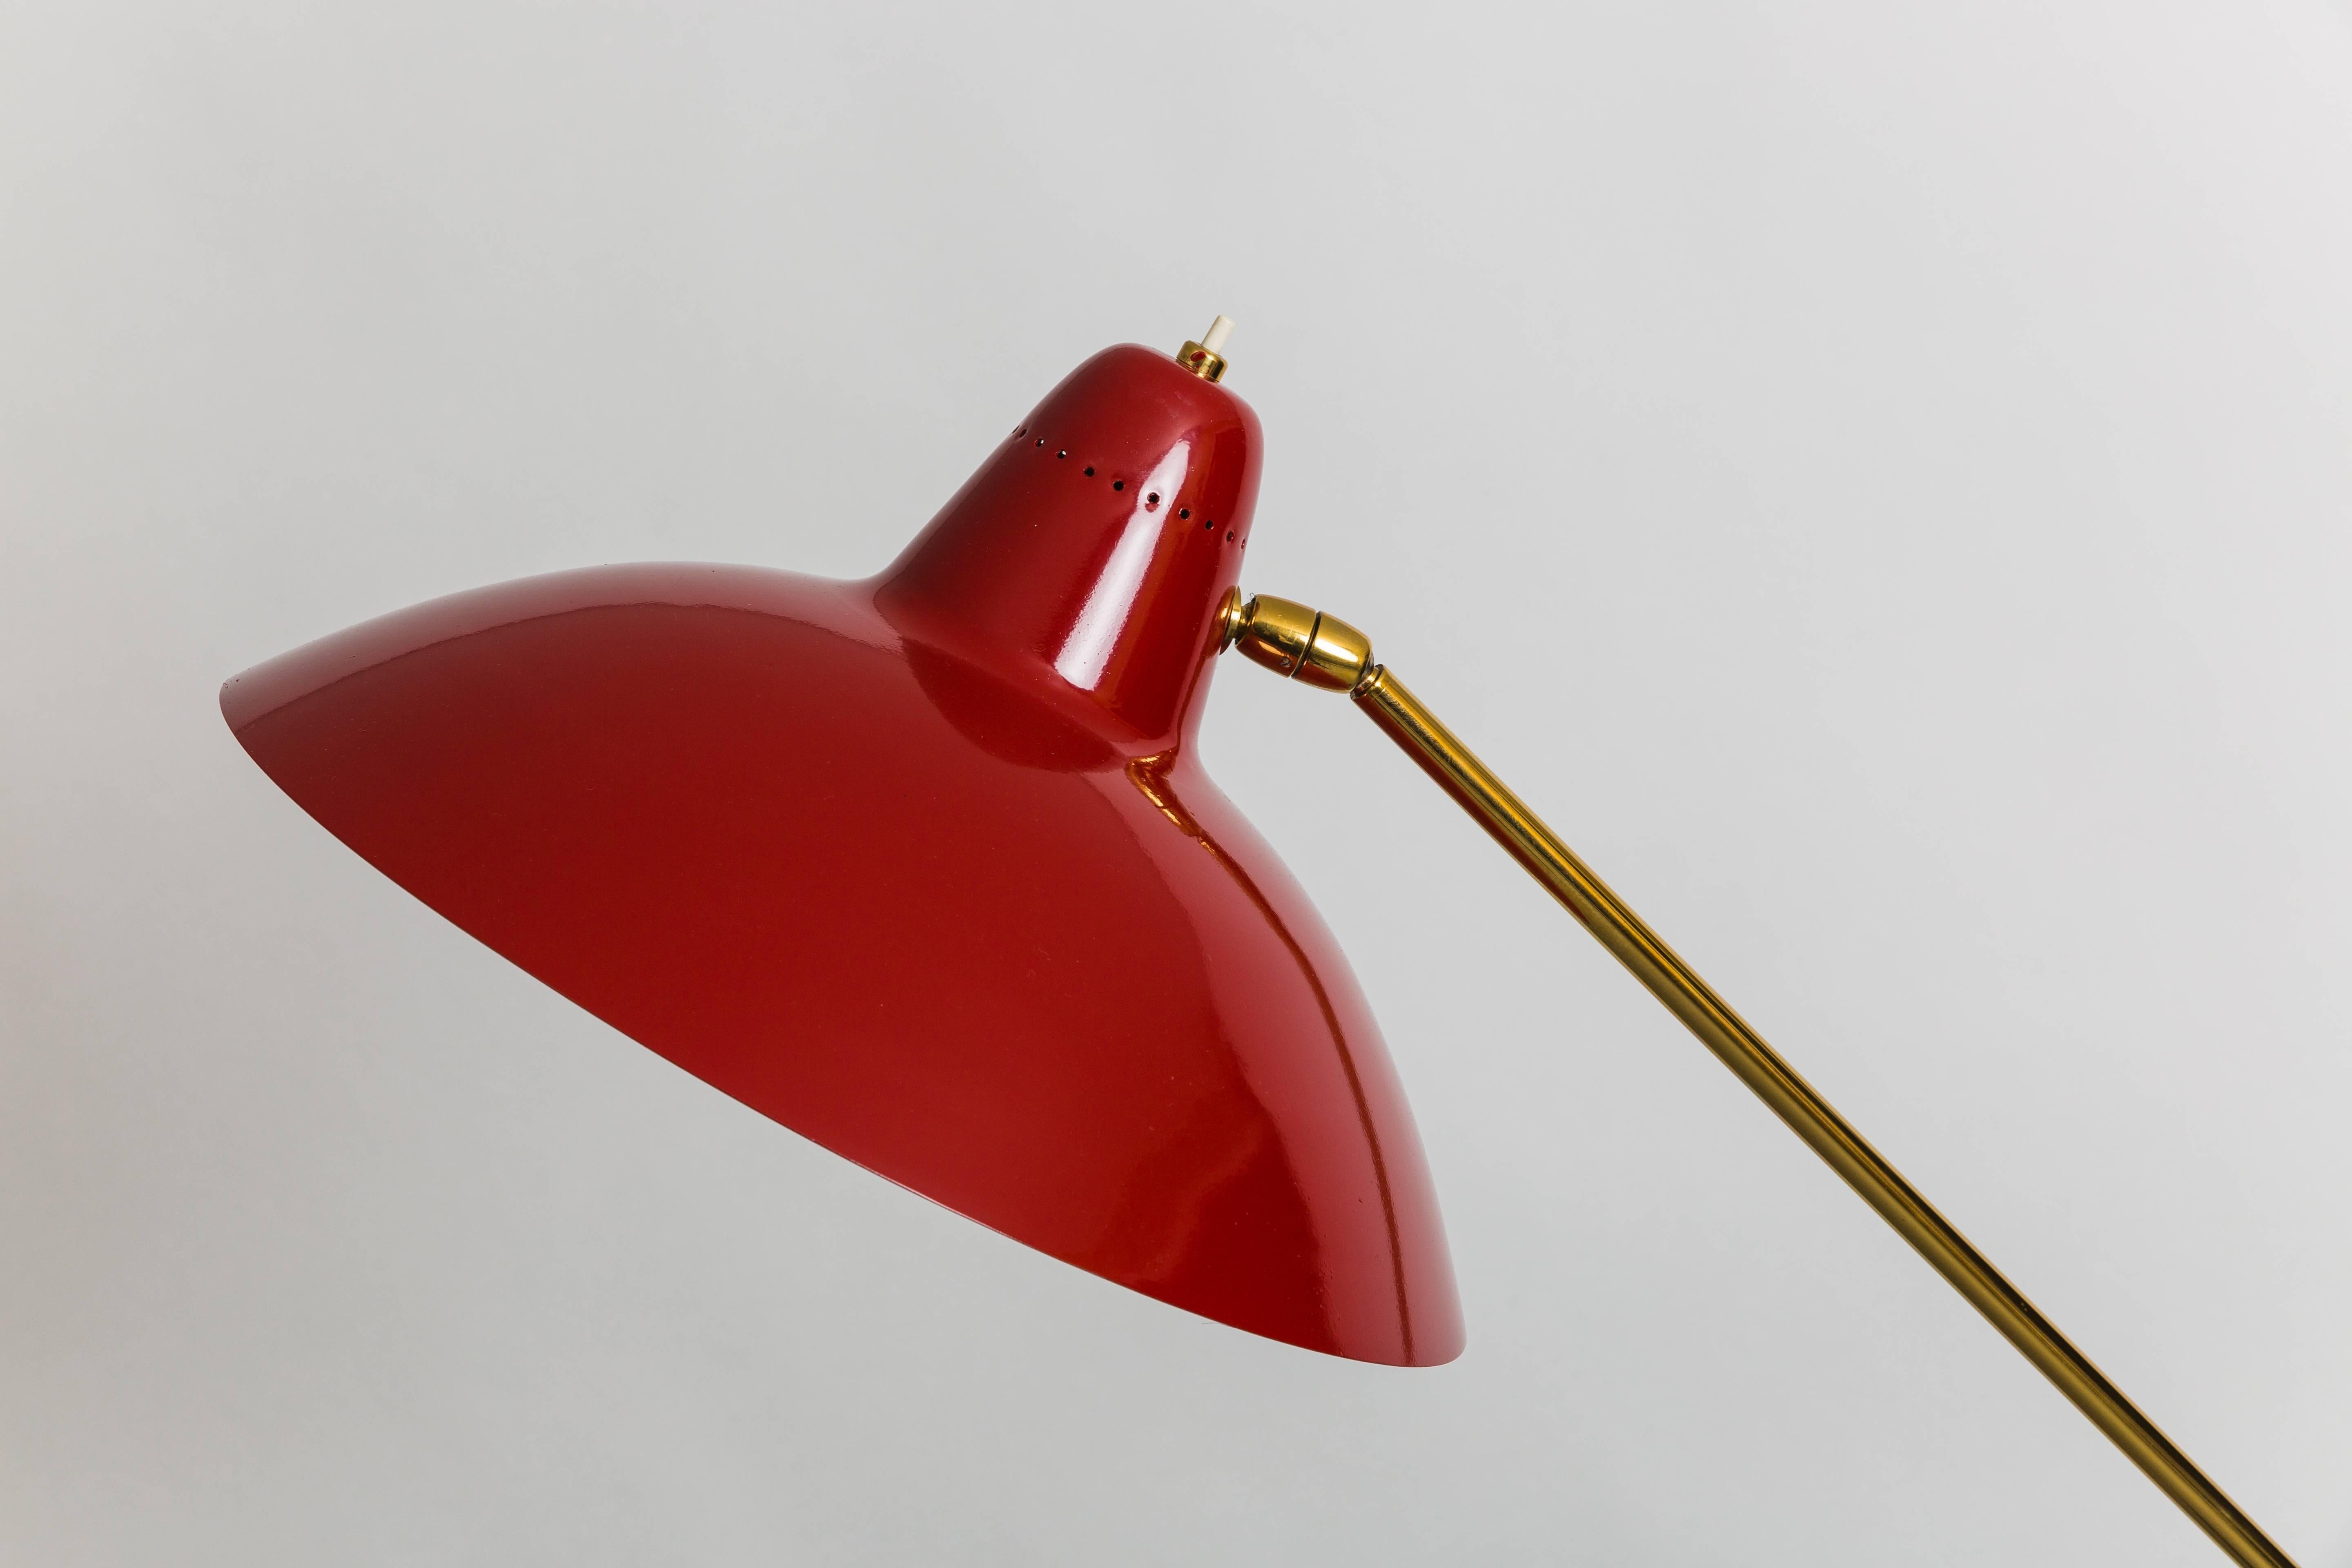 Adjustable gilt lacquer brass stem and counterweight on black marble base with pivoting red lacquer metal lampshade, Italy, 1950s. 
Fully restored and rewired to U.S. standards.